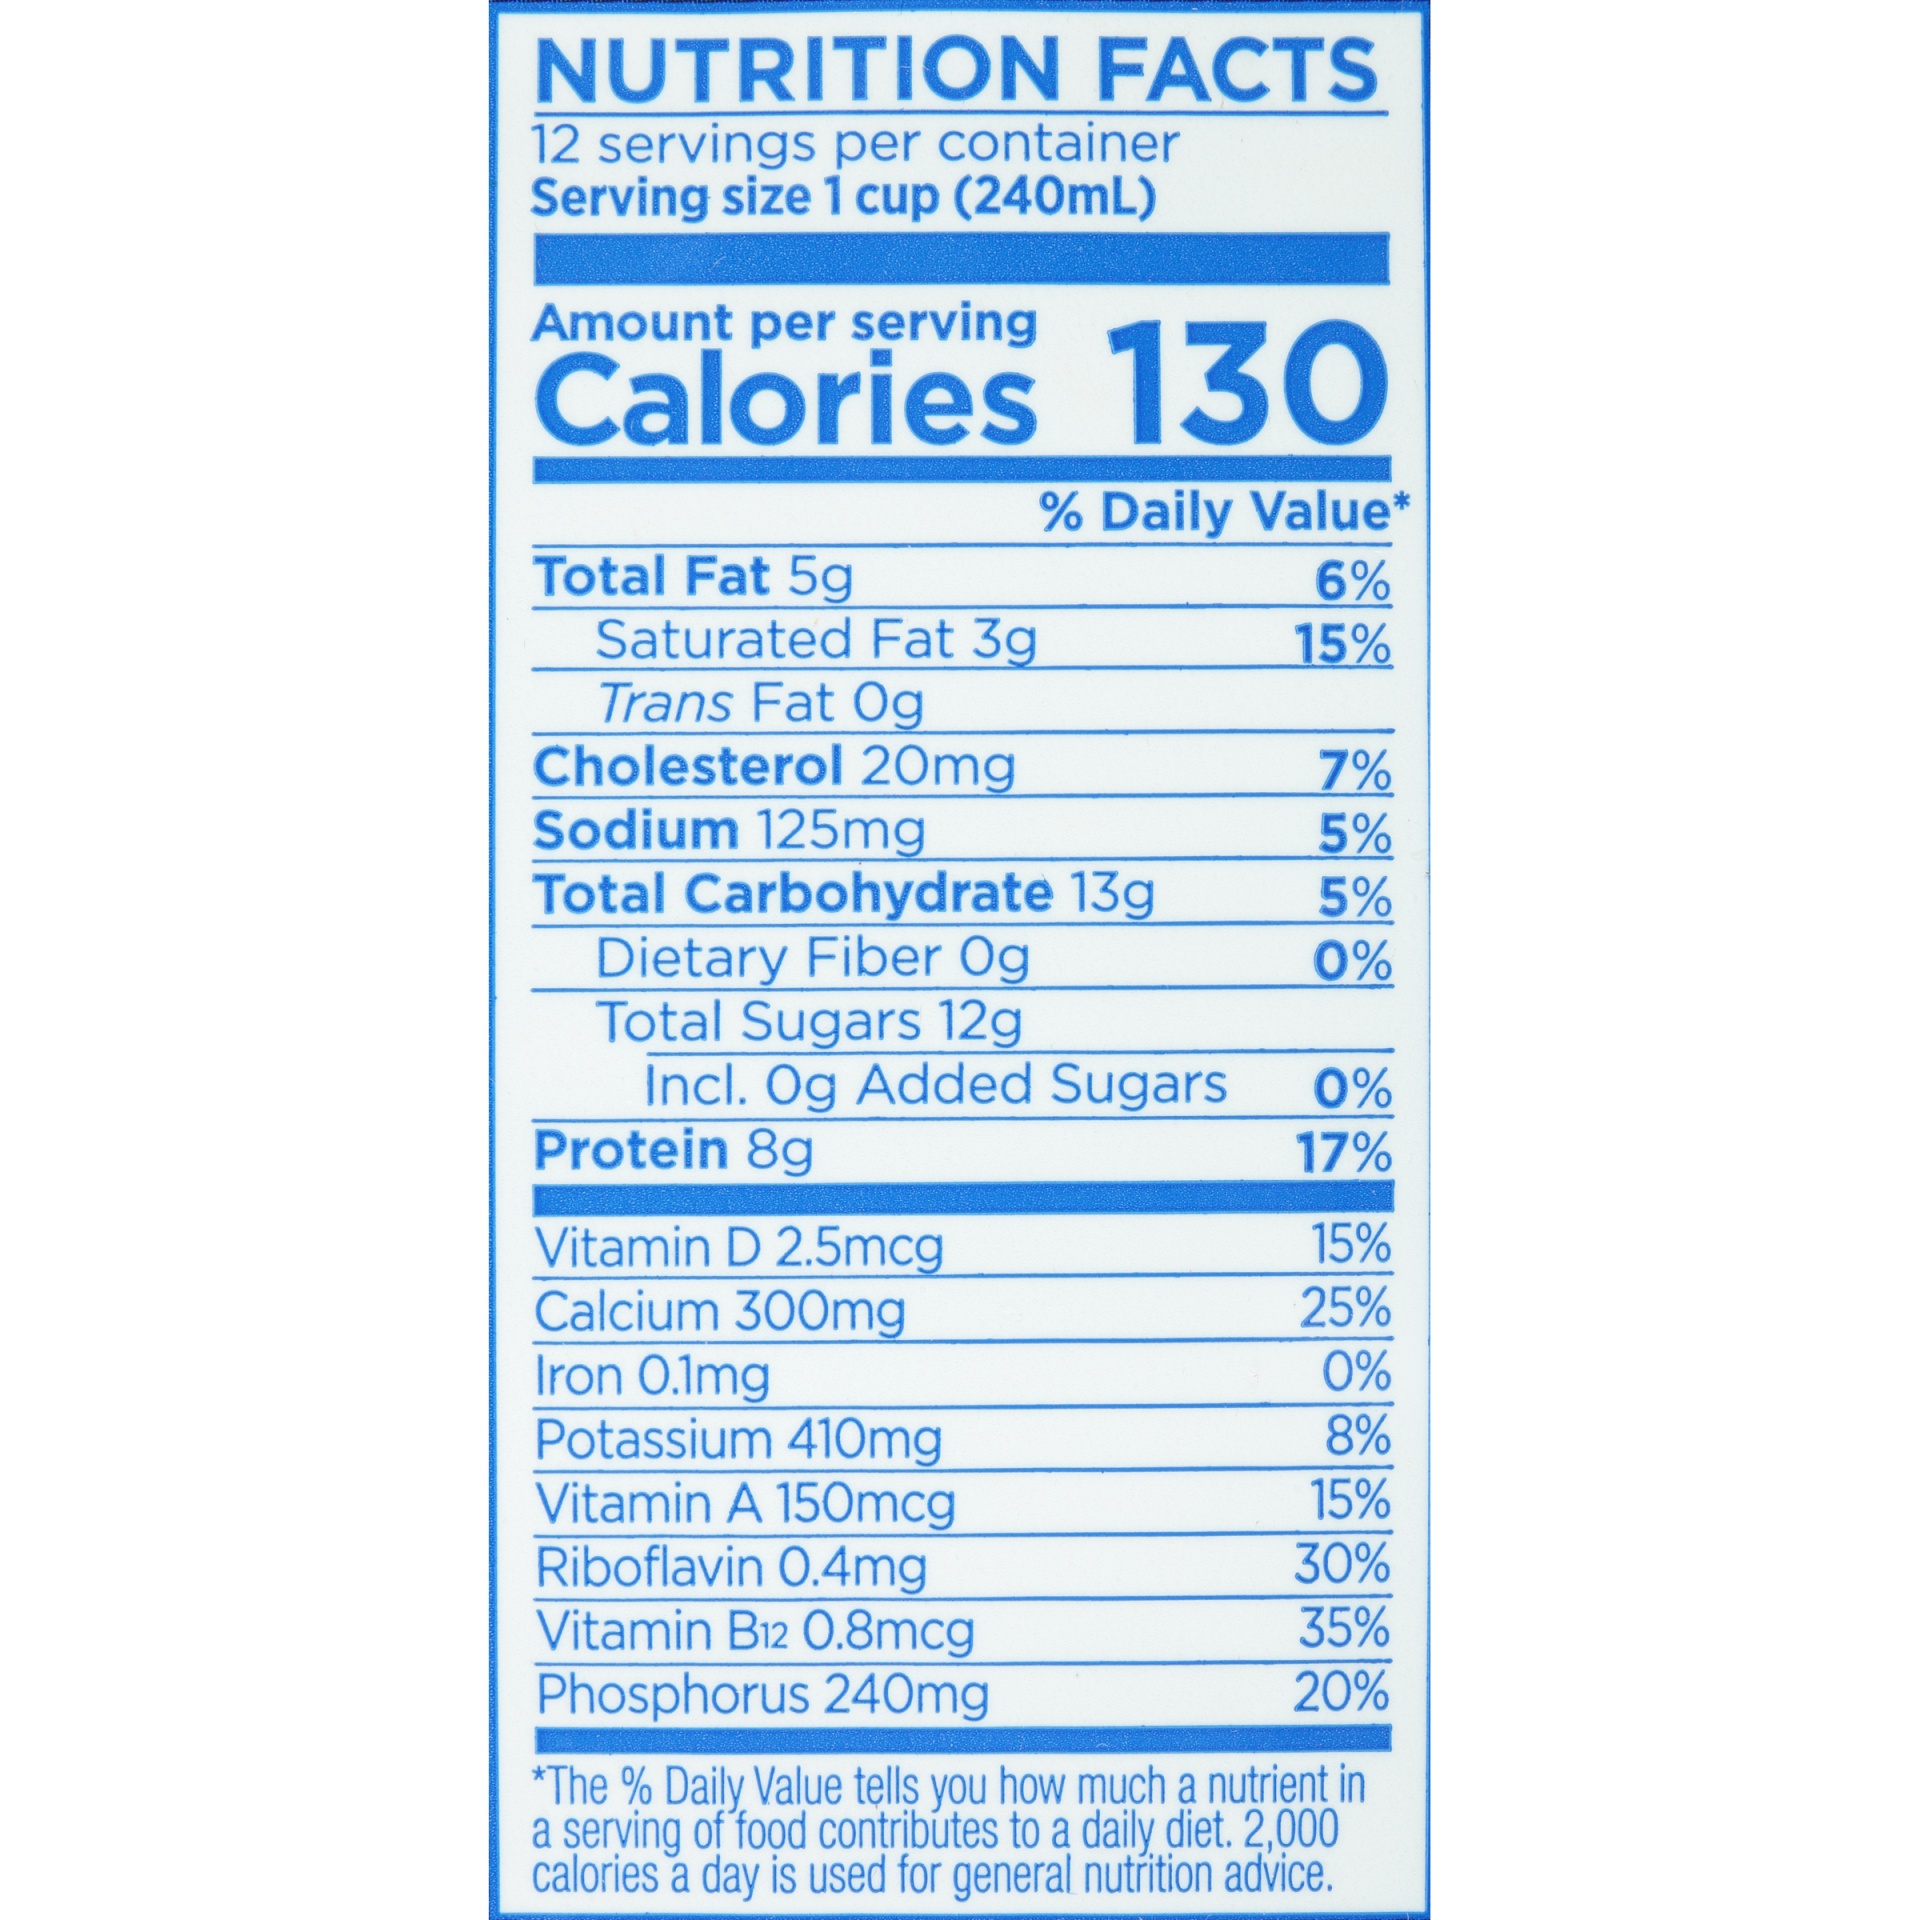 Lactaid Nutrition Facts Label Labels Design Ideas Images And | My XXX ...